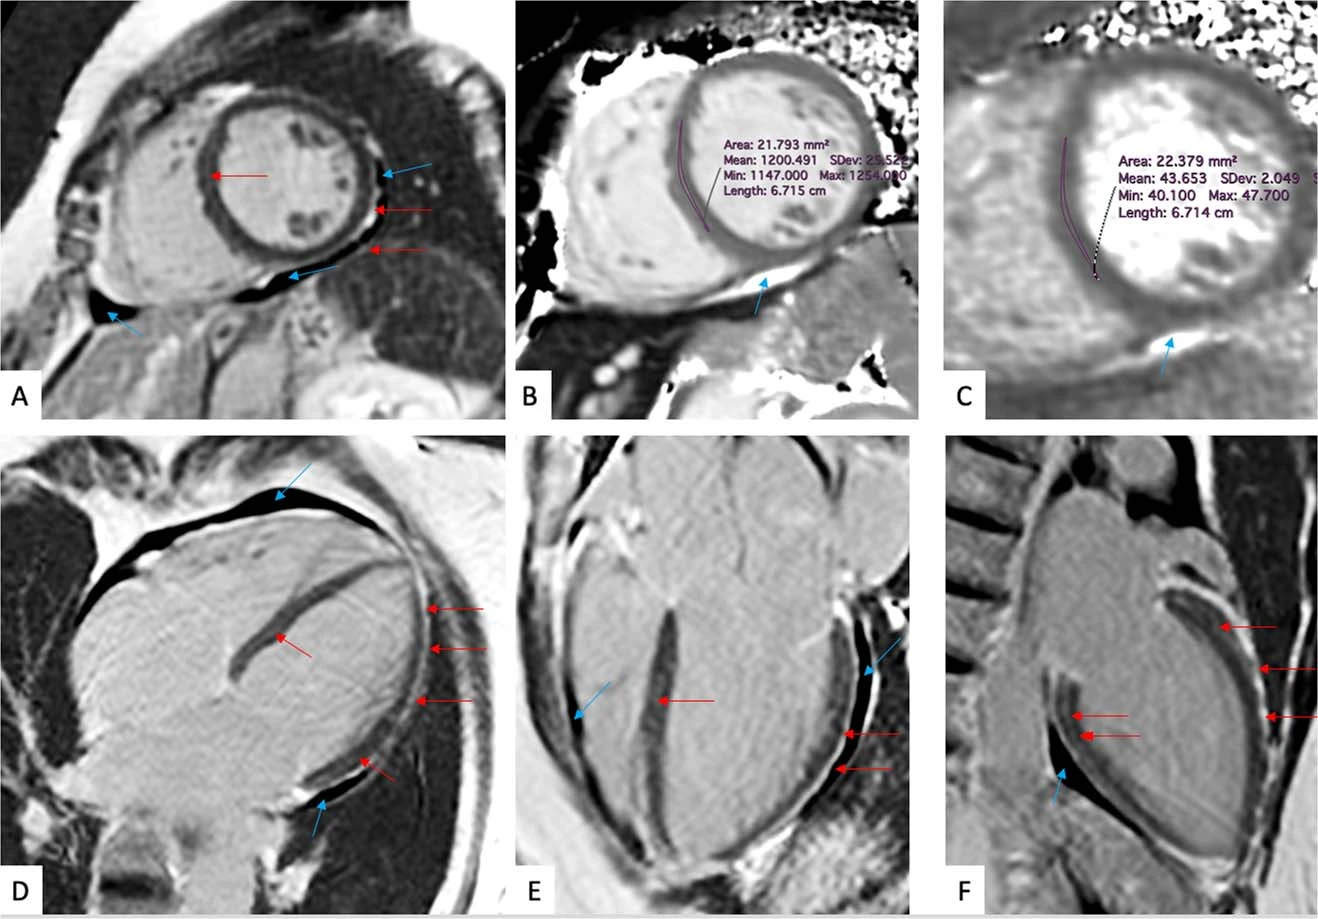 Myocardial mapping of symptomatic patient following mild COVID